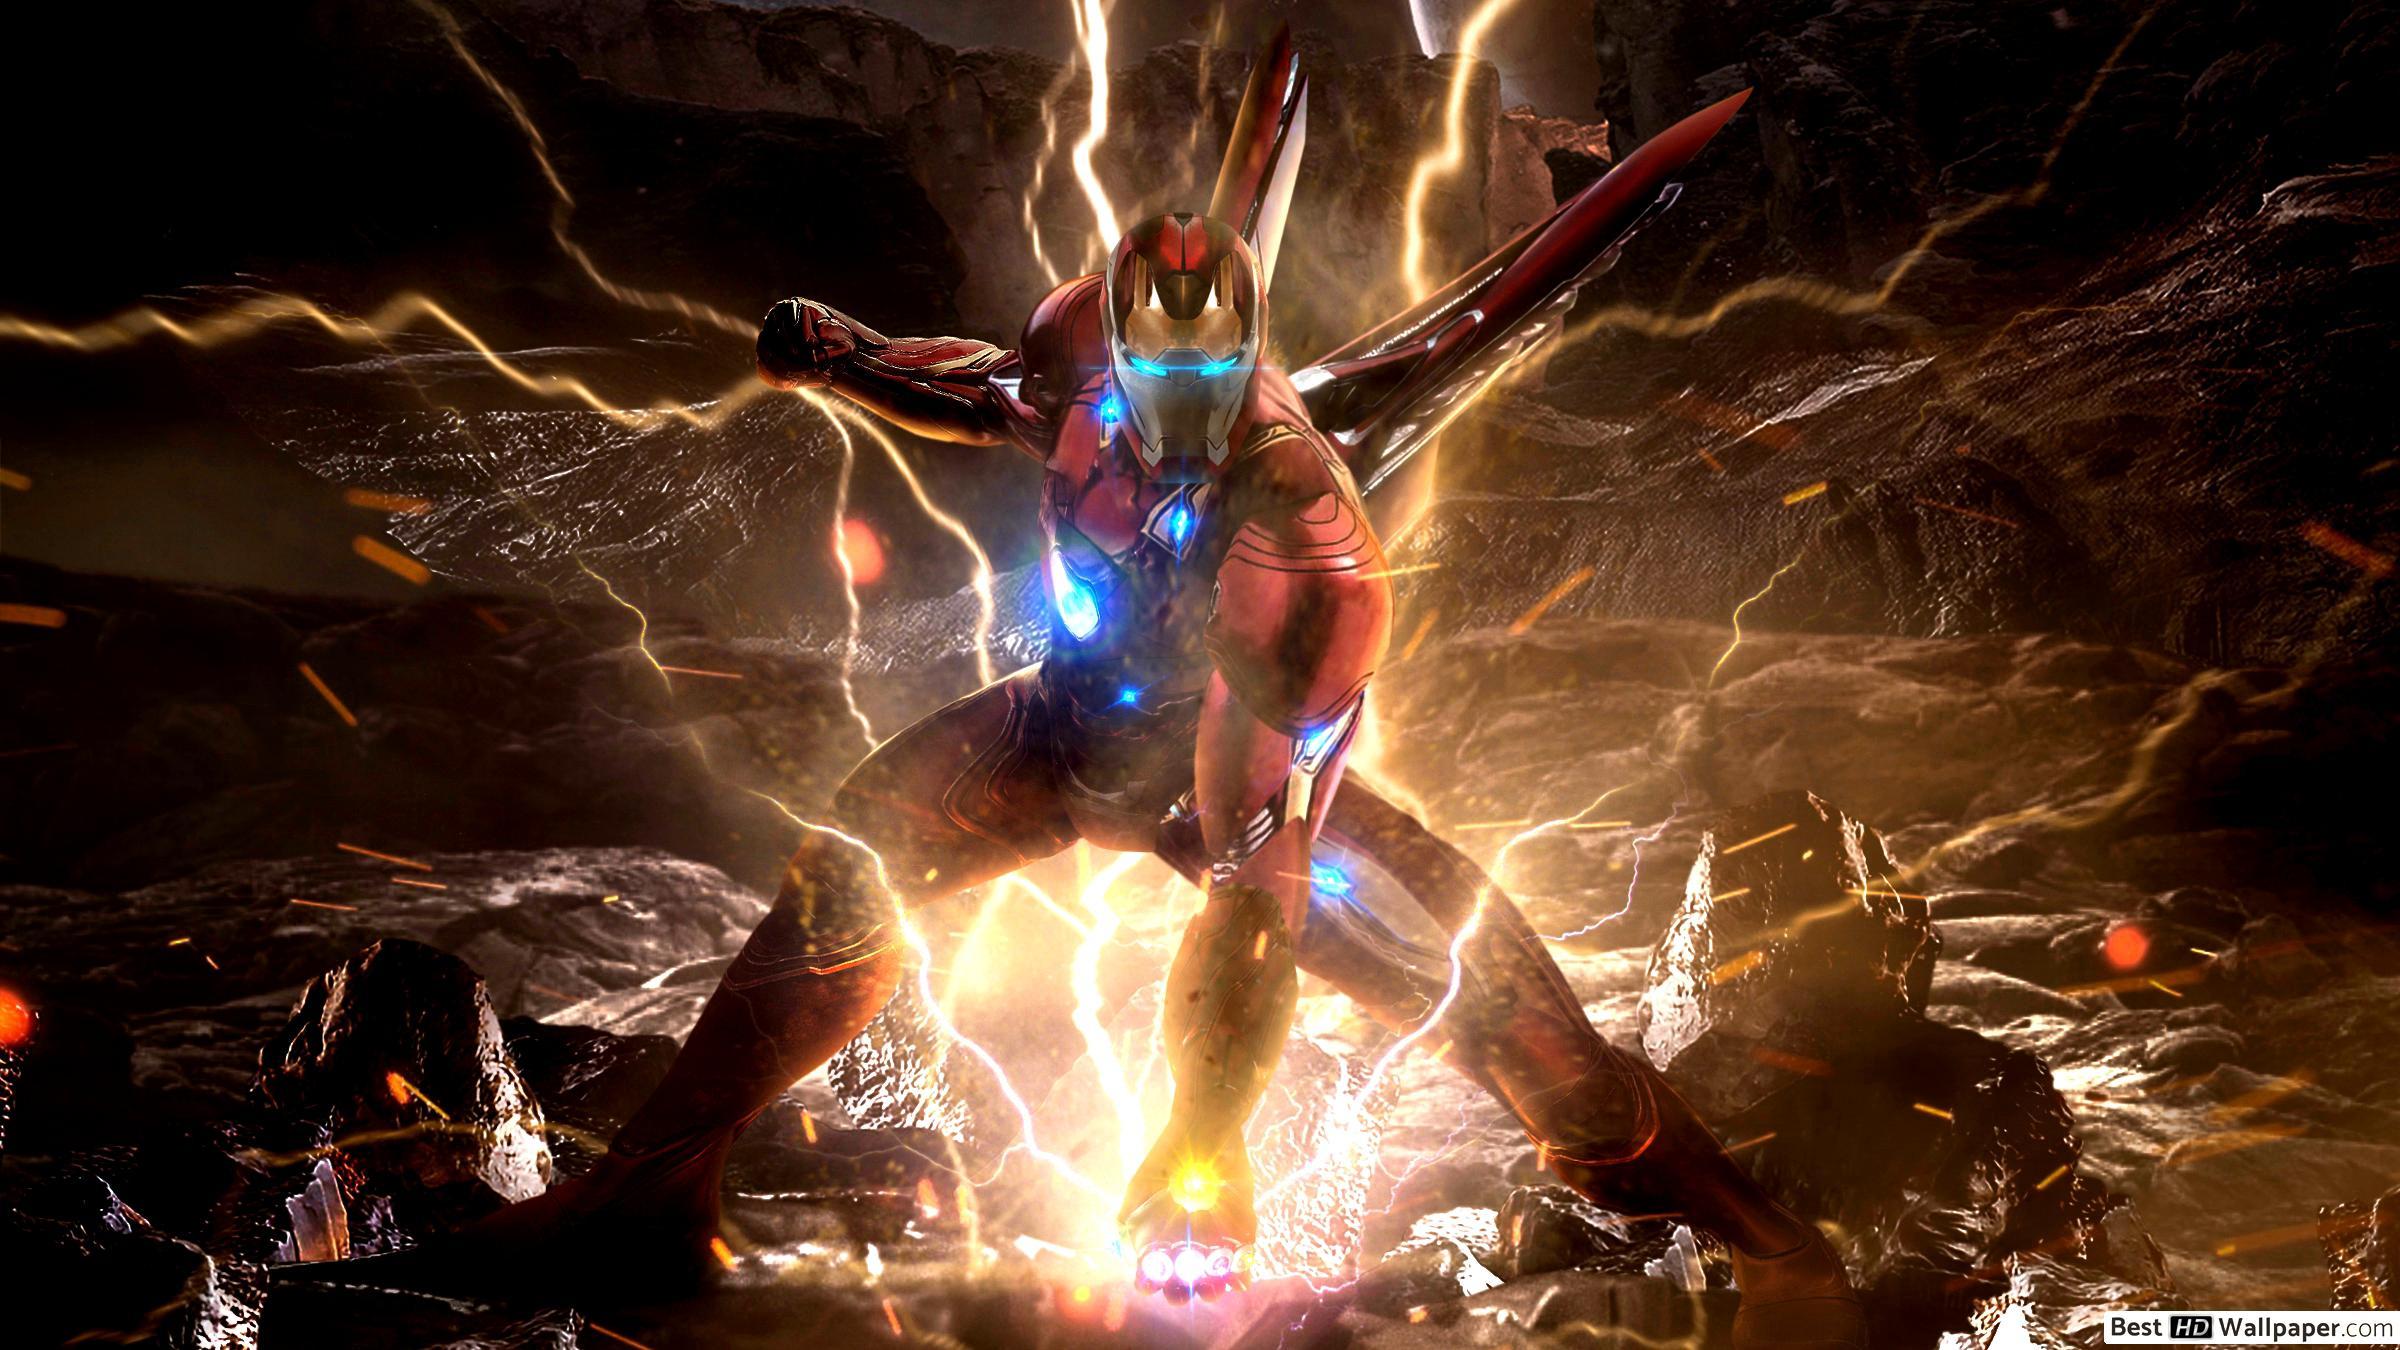 Avengers: Endgame in action with infinity gauntlet HD wallpaper download